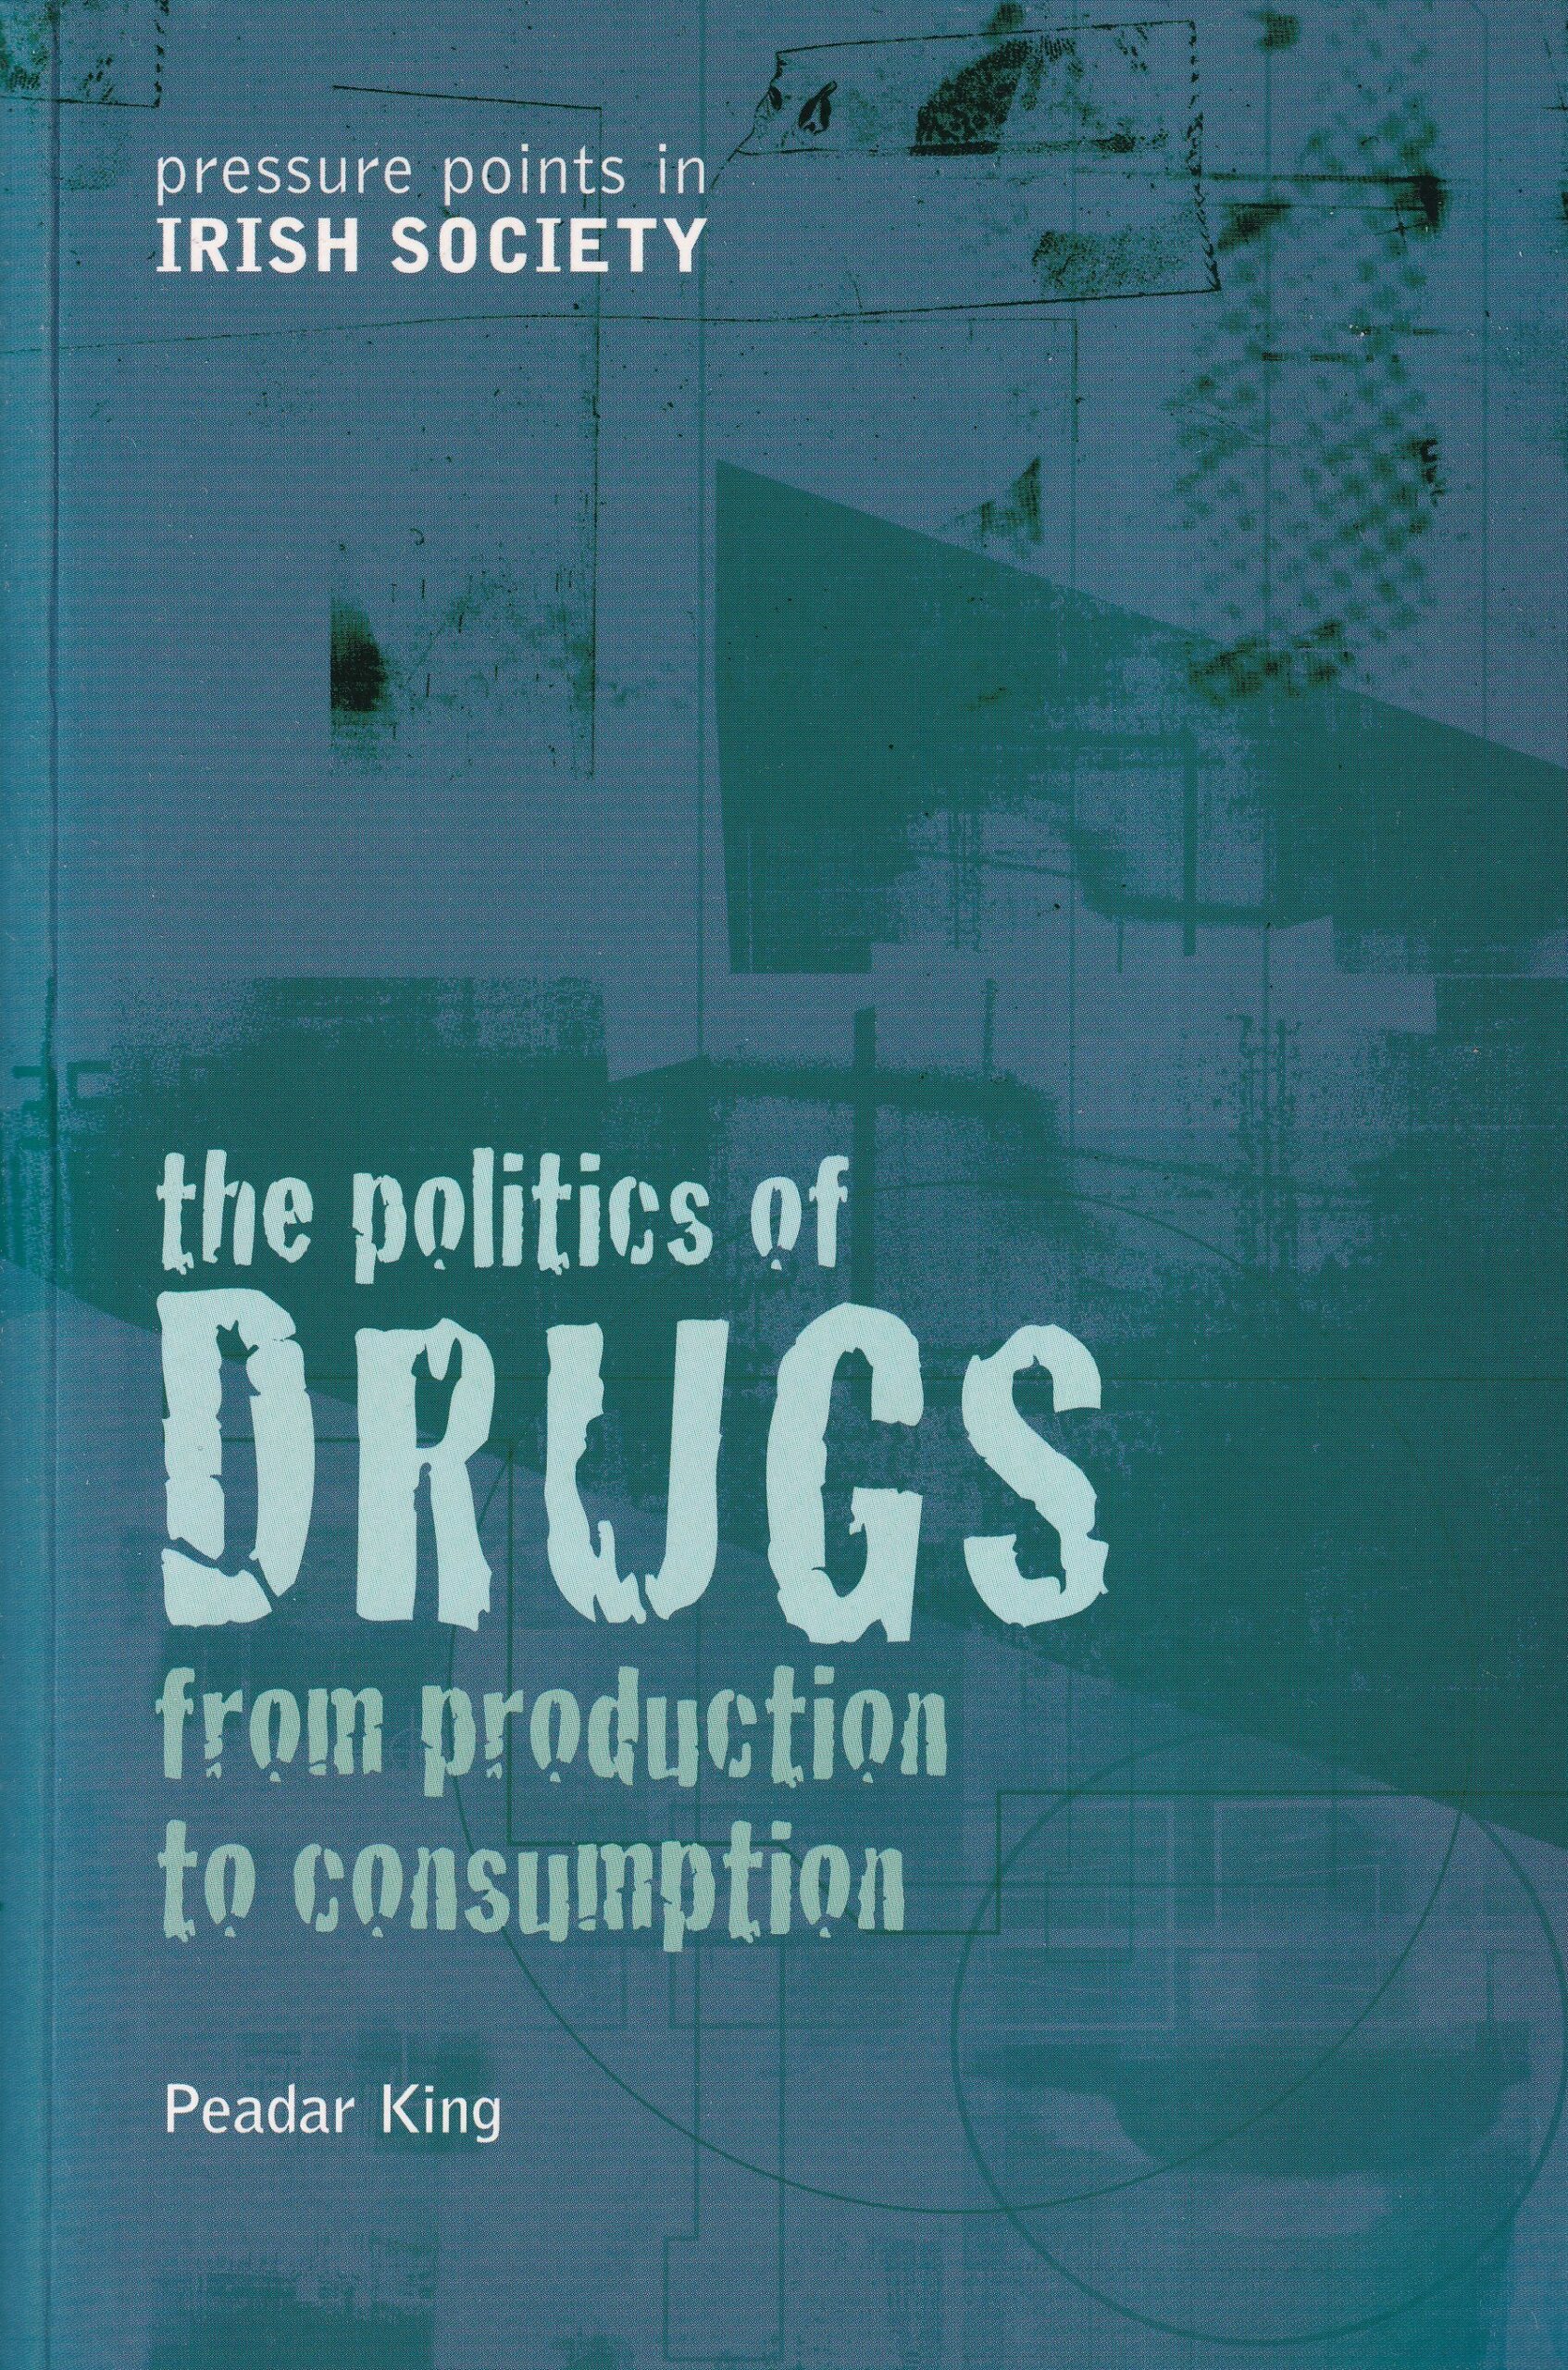 The Politics of Drugs: From Production to Consumption | Peadar King | Charlie Byrne's